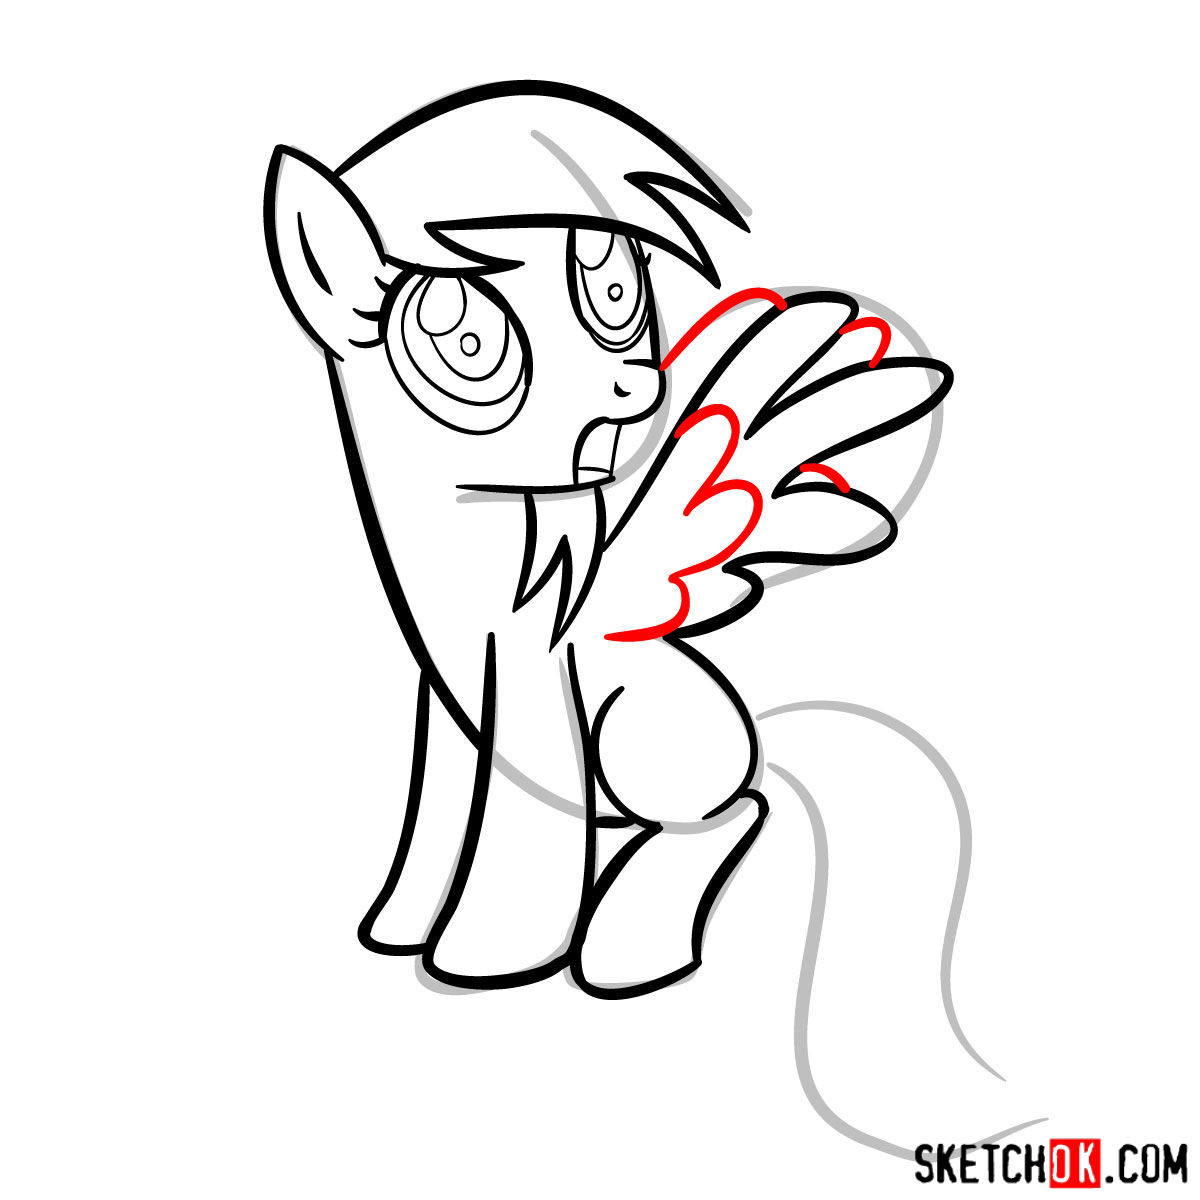 How to draw Derpy Hooves pegasus pony - step 08